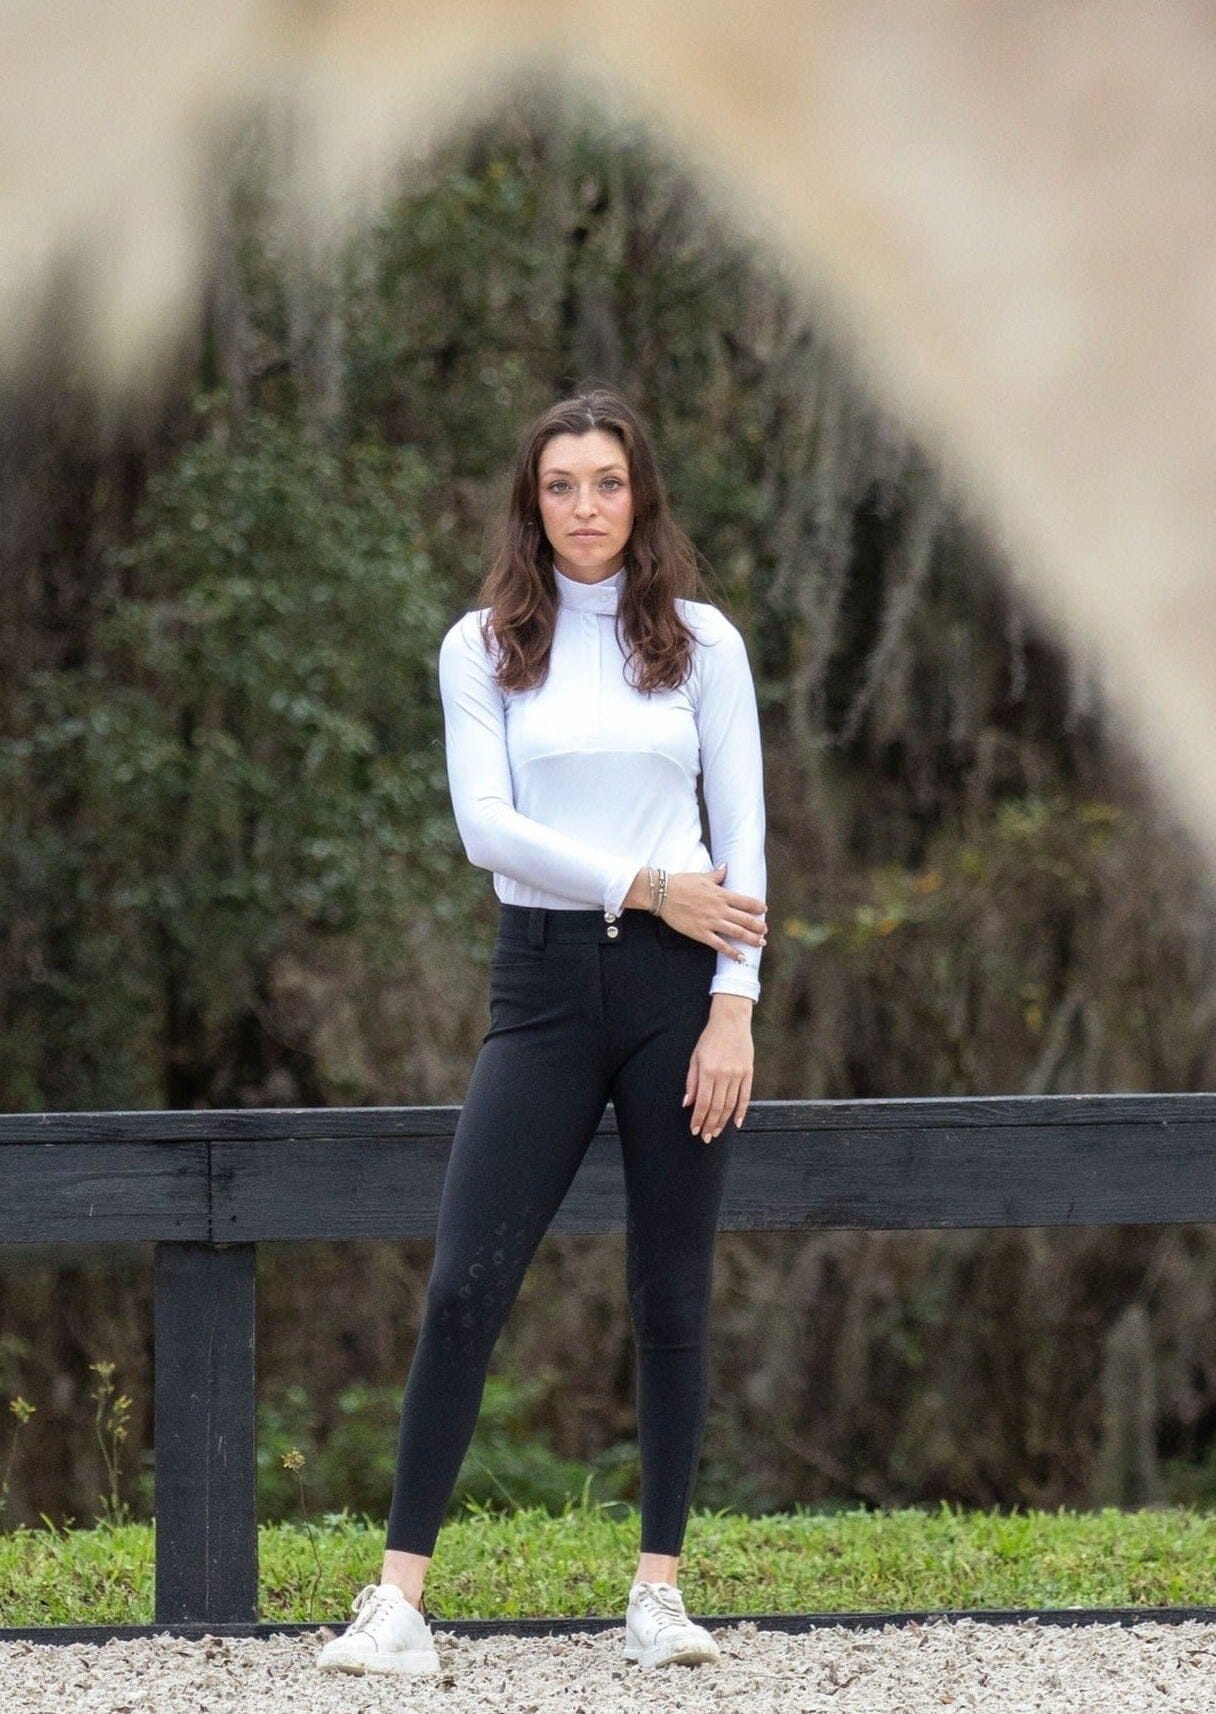 Brianne Everyday Riding Breeches in Black Riding Breeches CriniereLife 